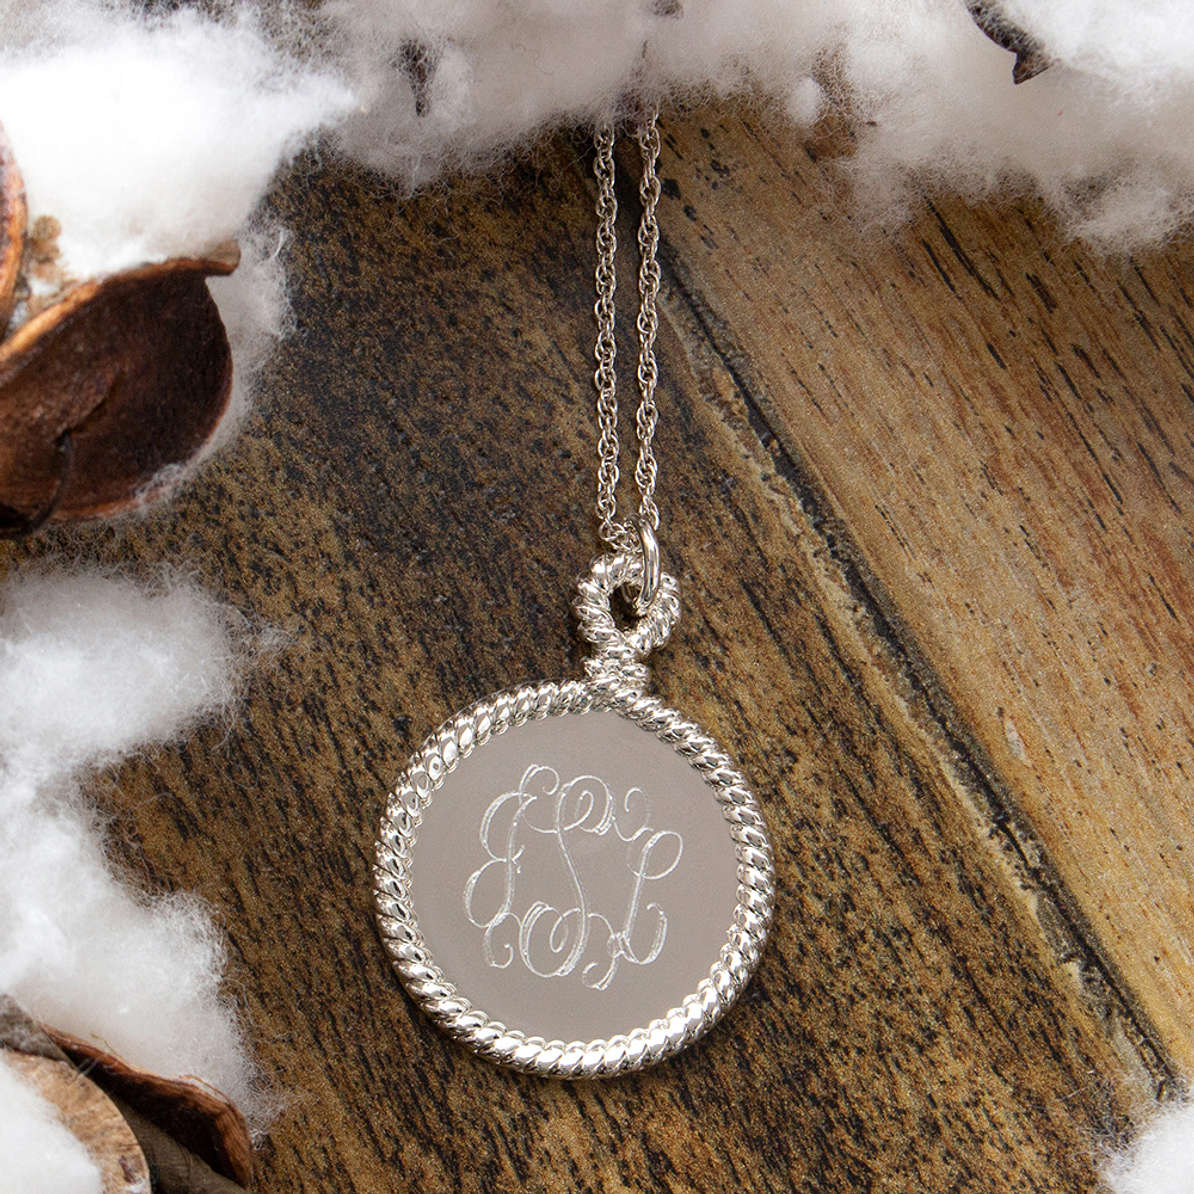 Nautical Rope Monogrammed Necklace - Marleylilly